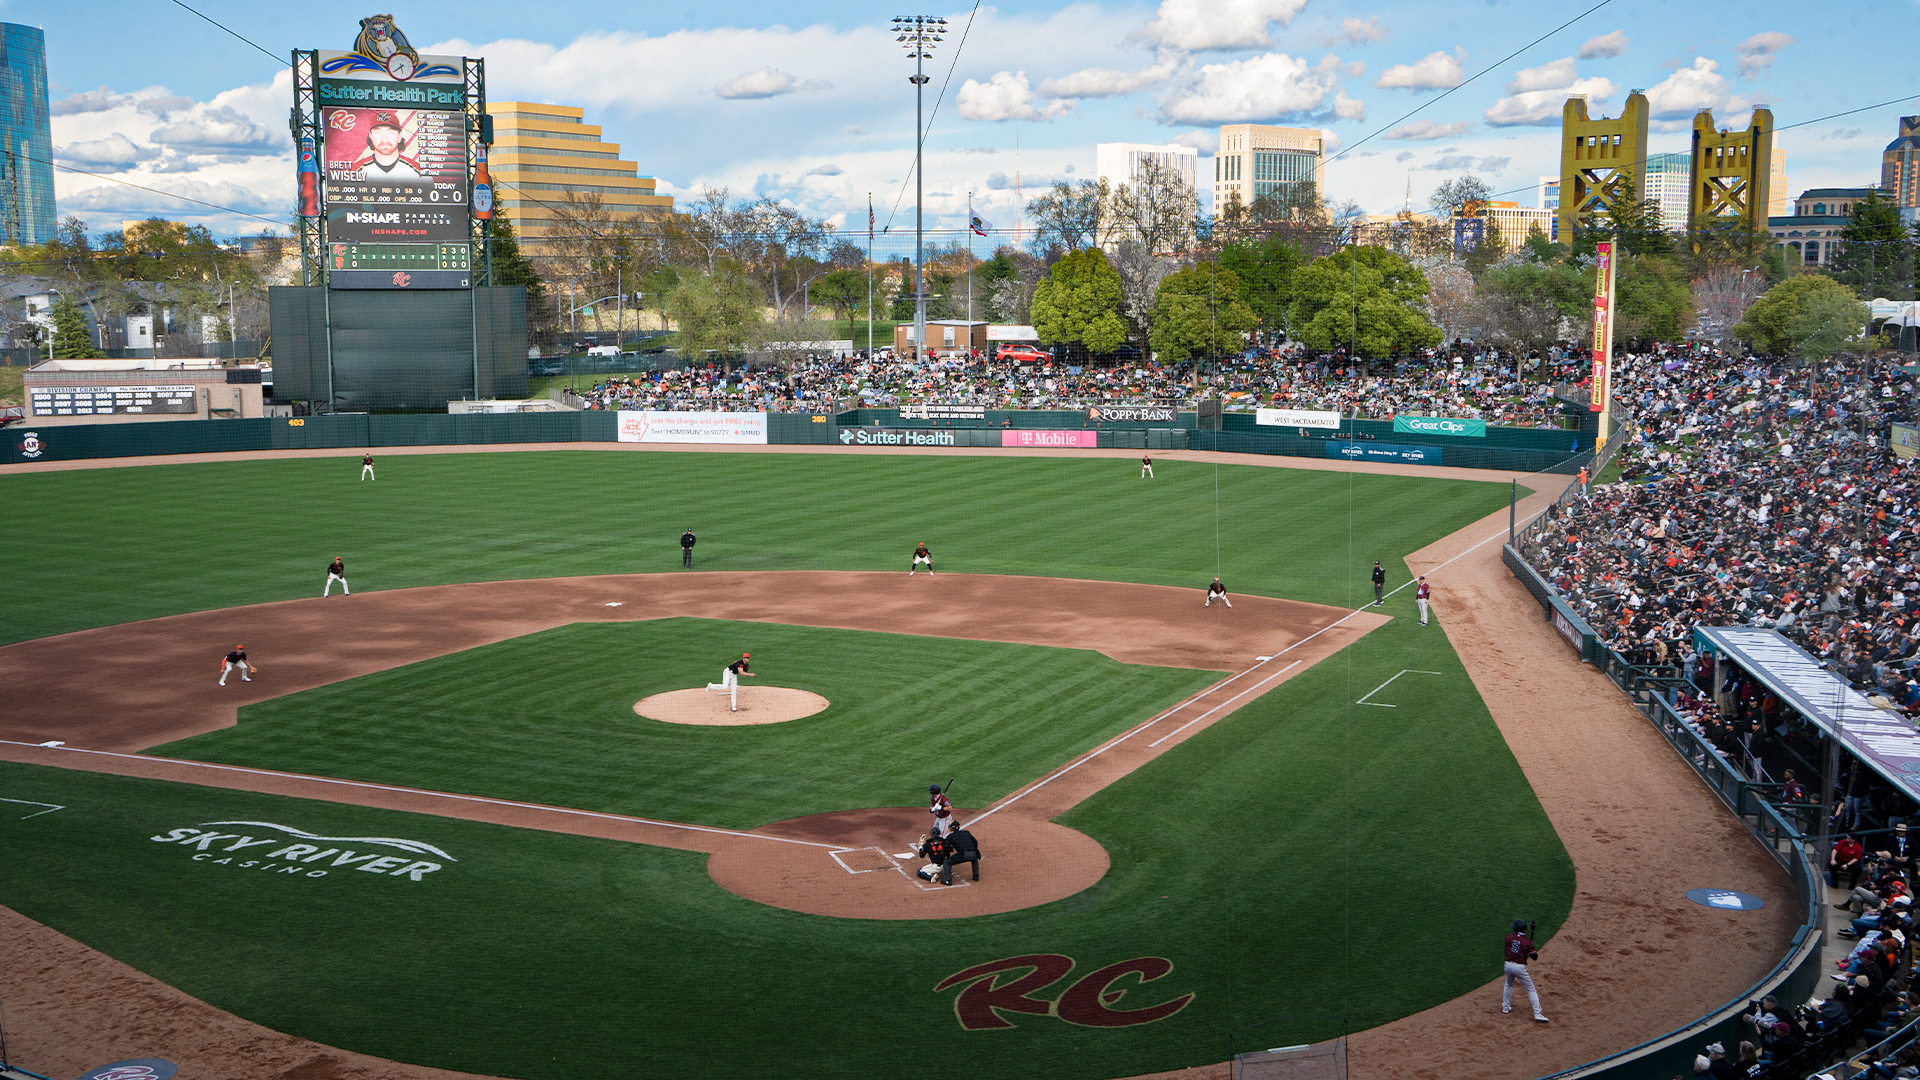 The San Francisco Giants take on the Sacramento River Cats at Sutter Health Park....